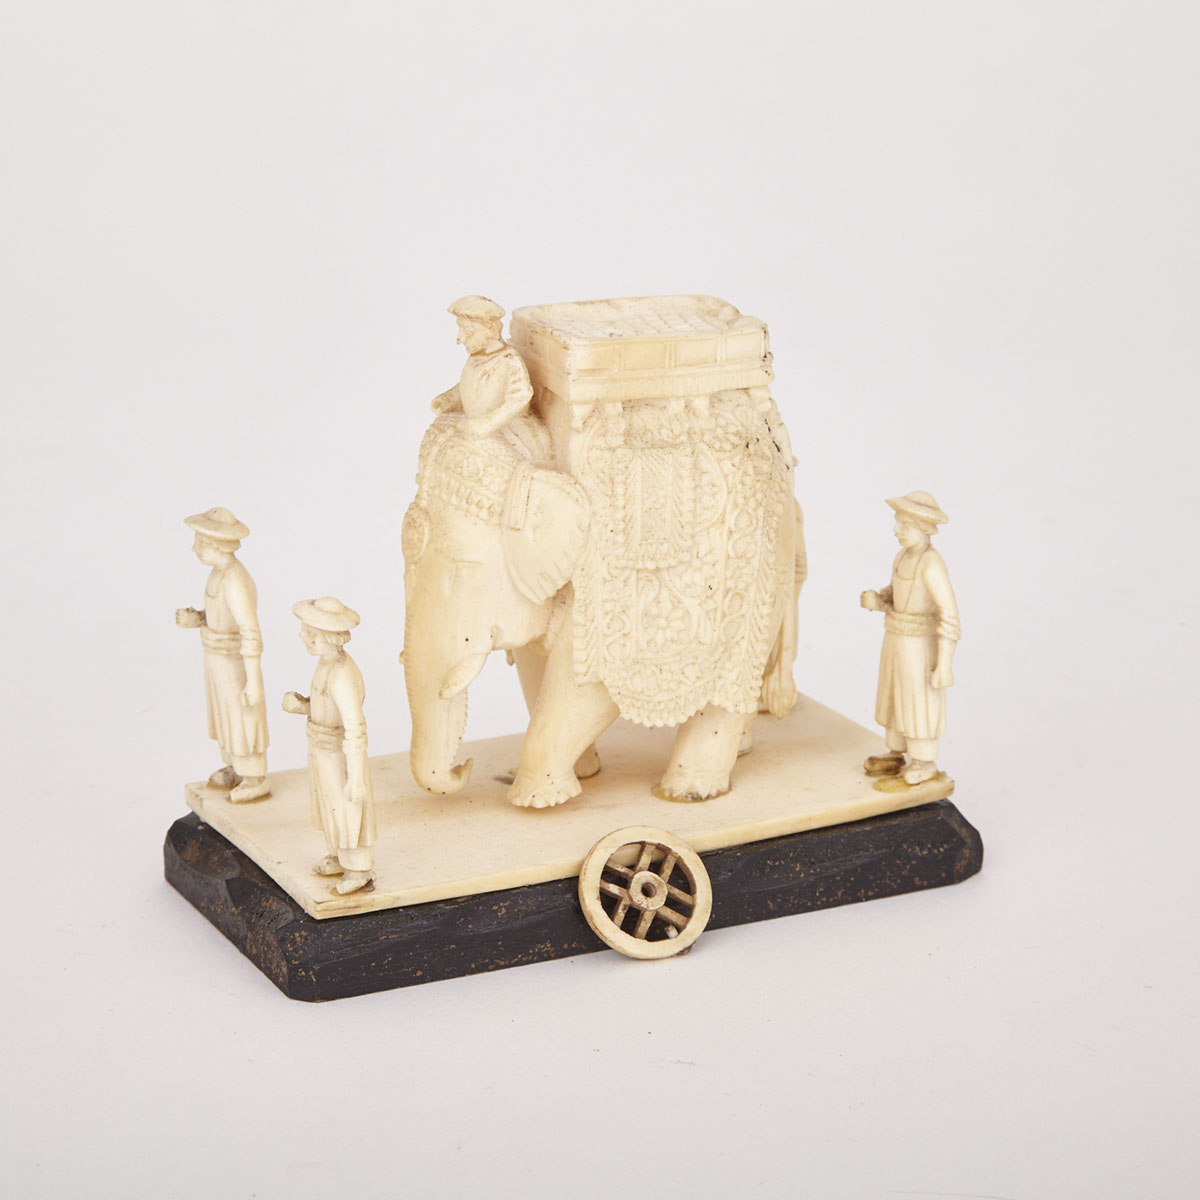 Carved Ivory Elephant with Attendants, Early 20th Century